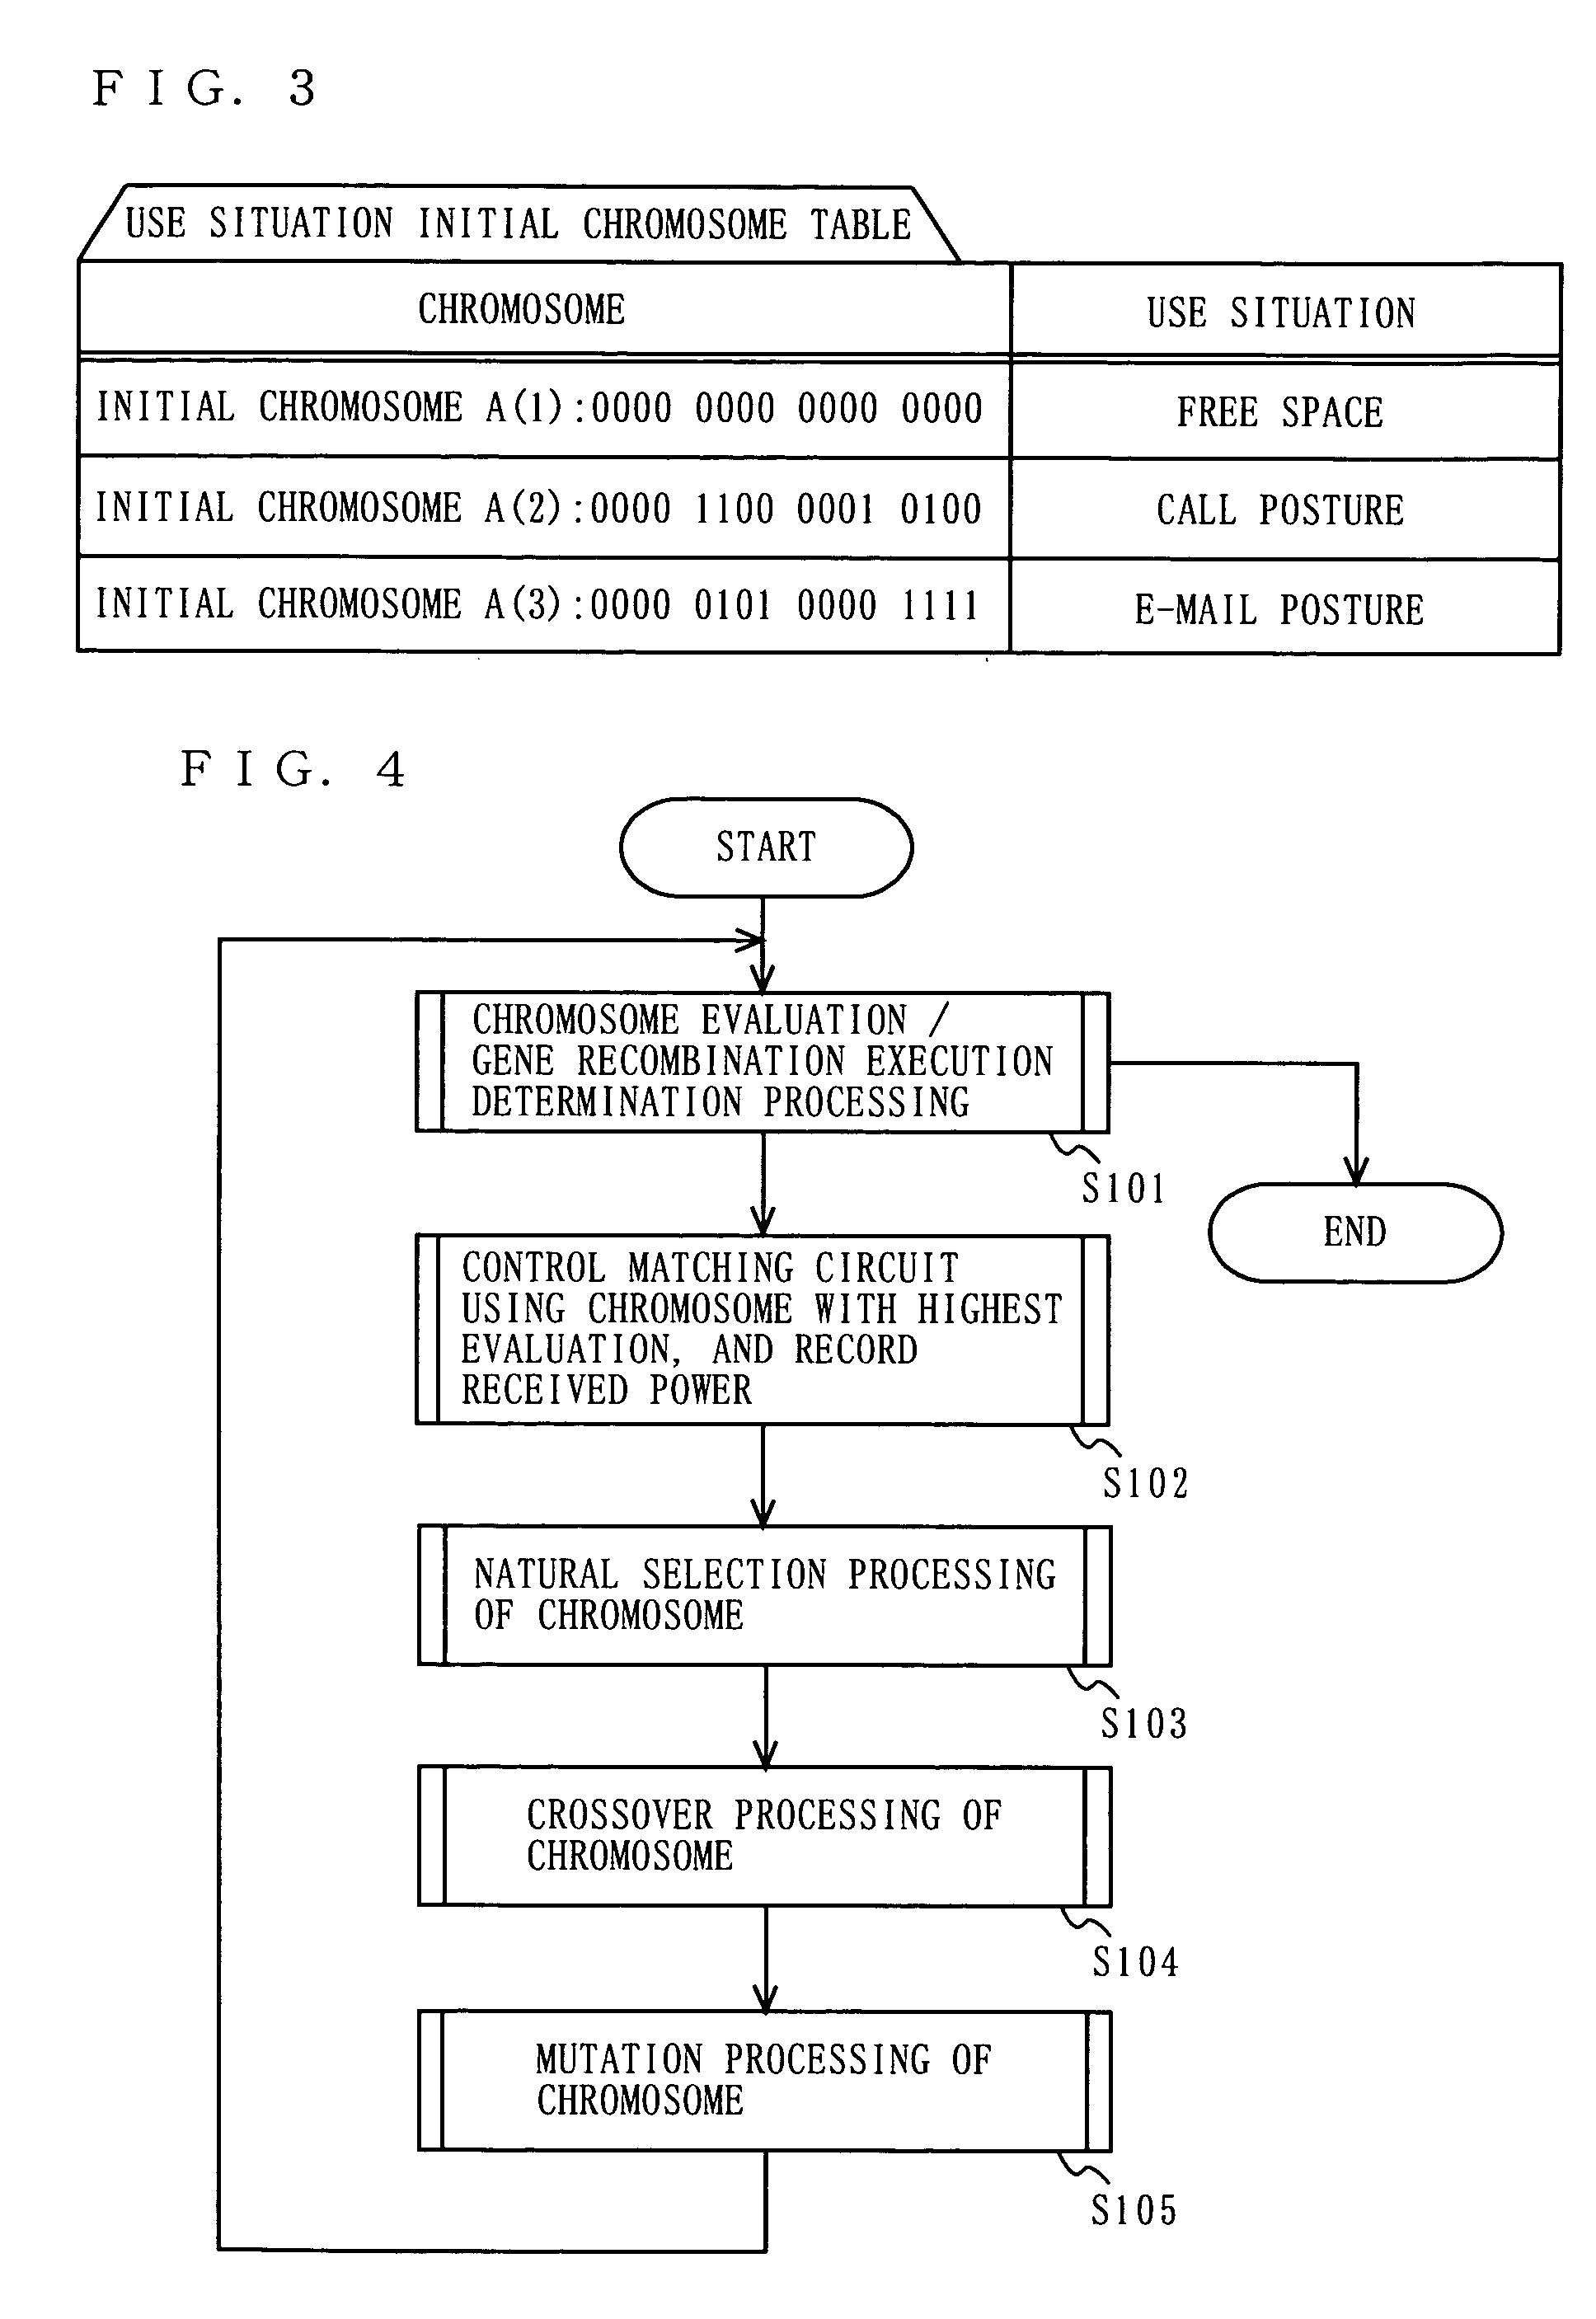 Mobile Radio Appartus Capable of Adaptive Impedace Matching